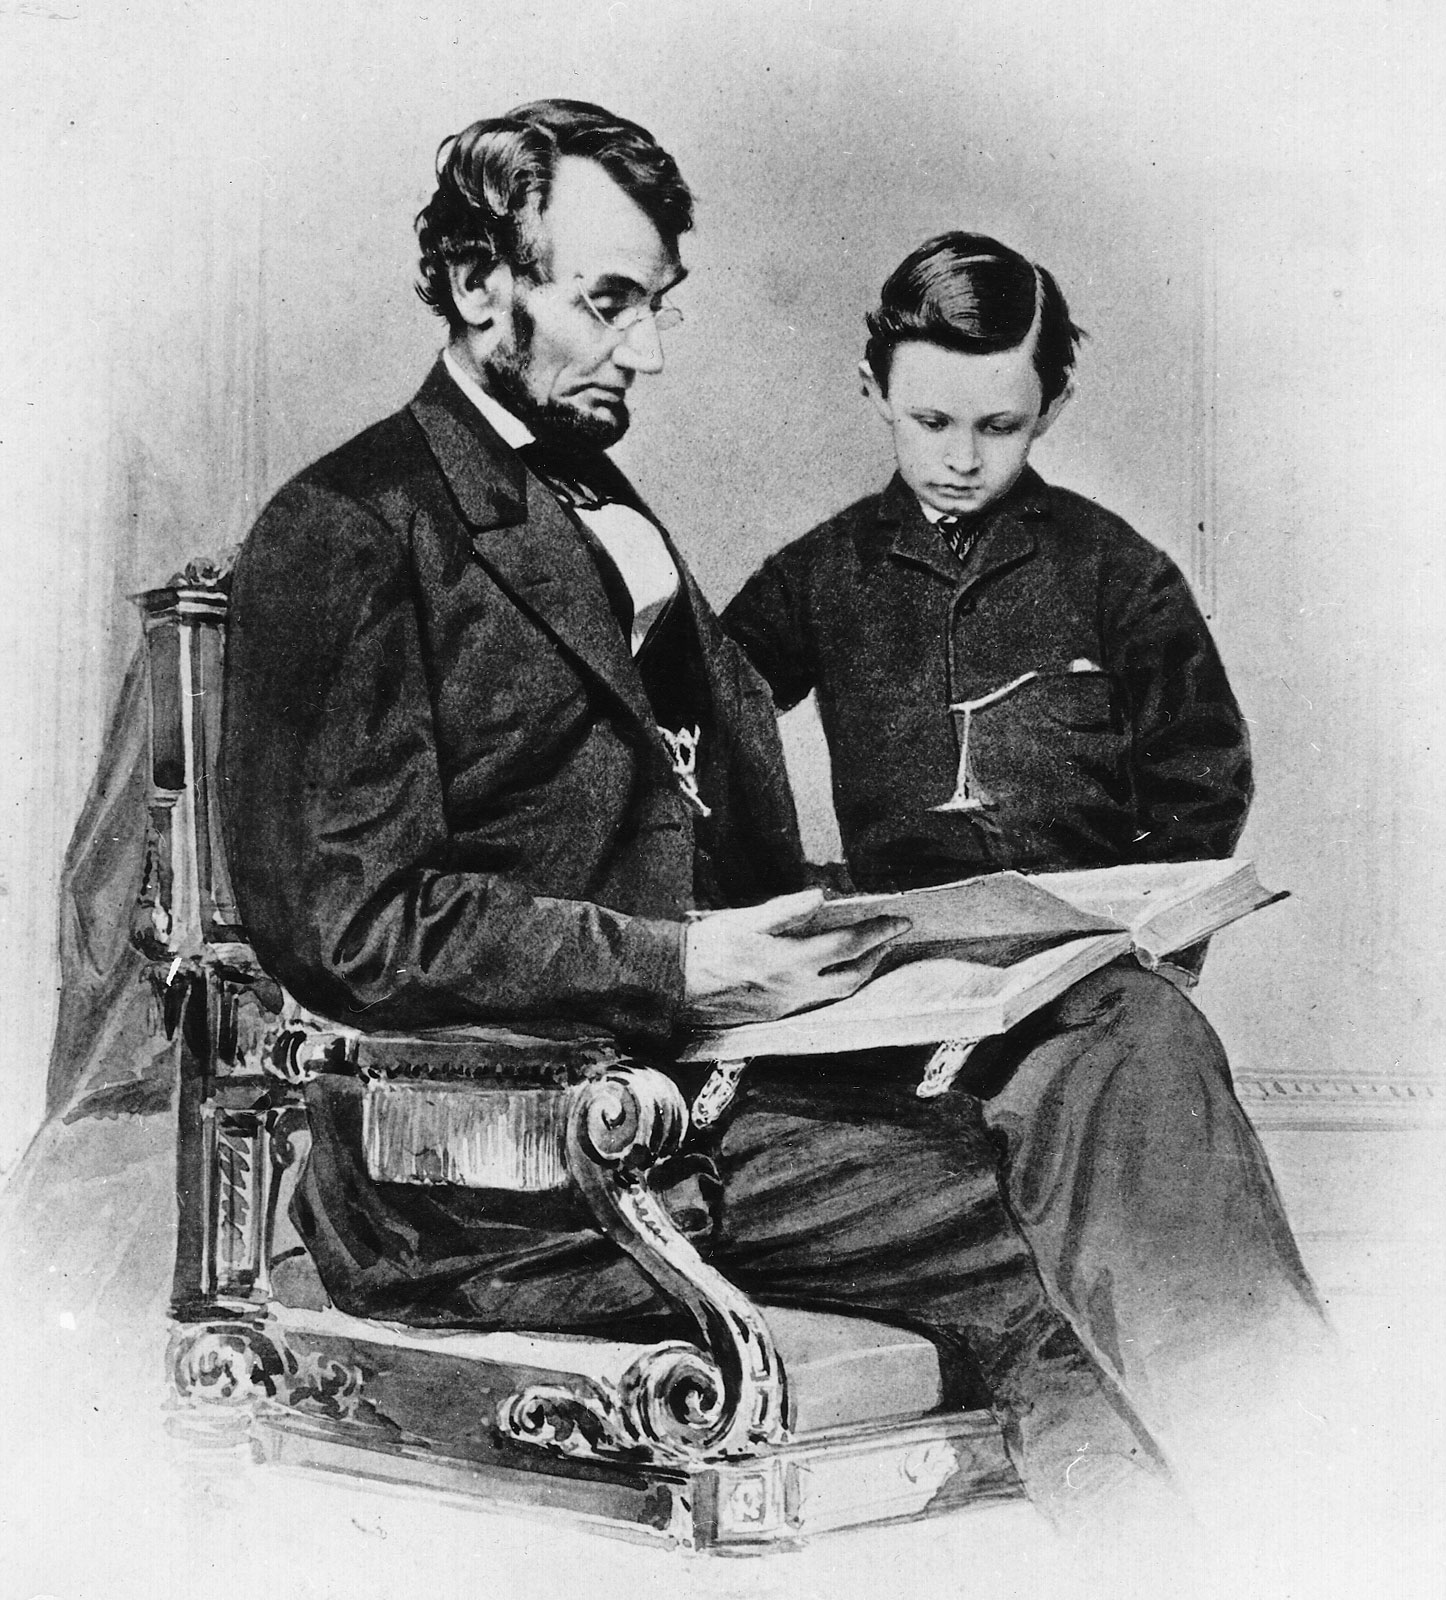 tad lincoln brings soldier to white house